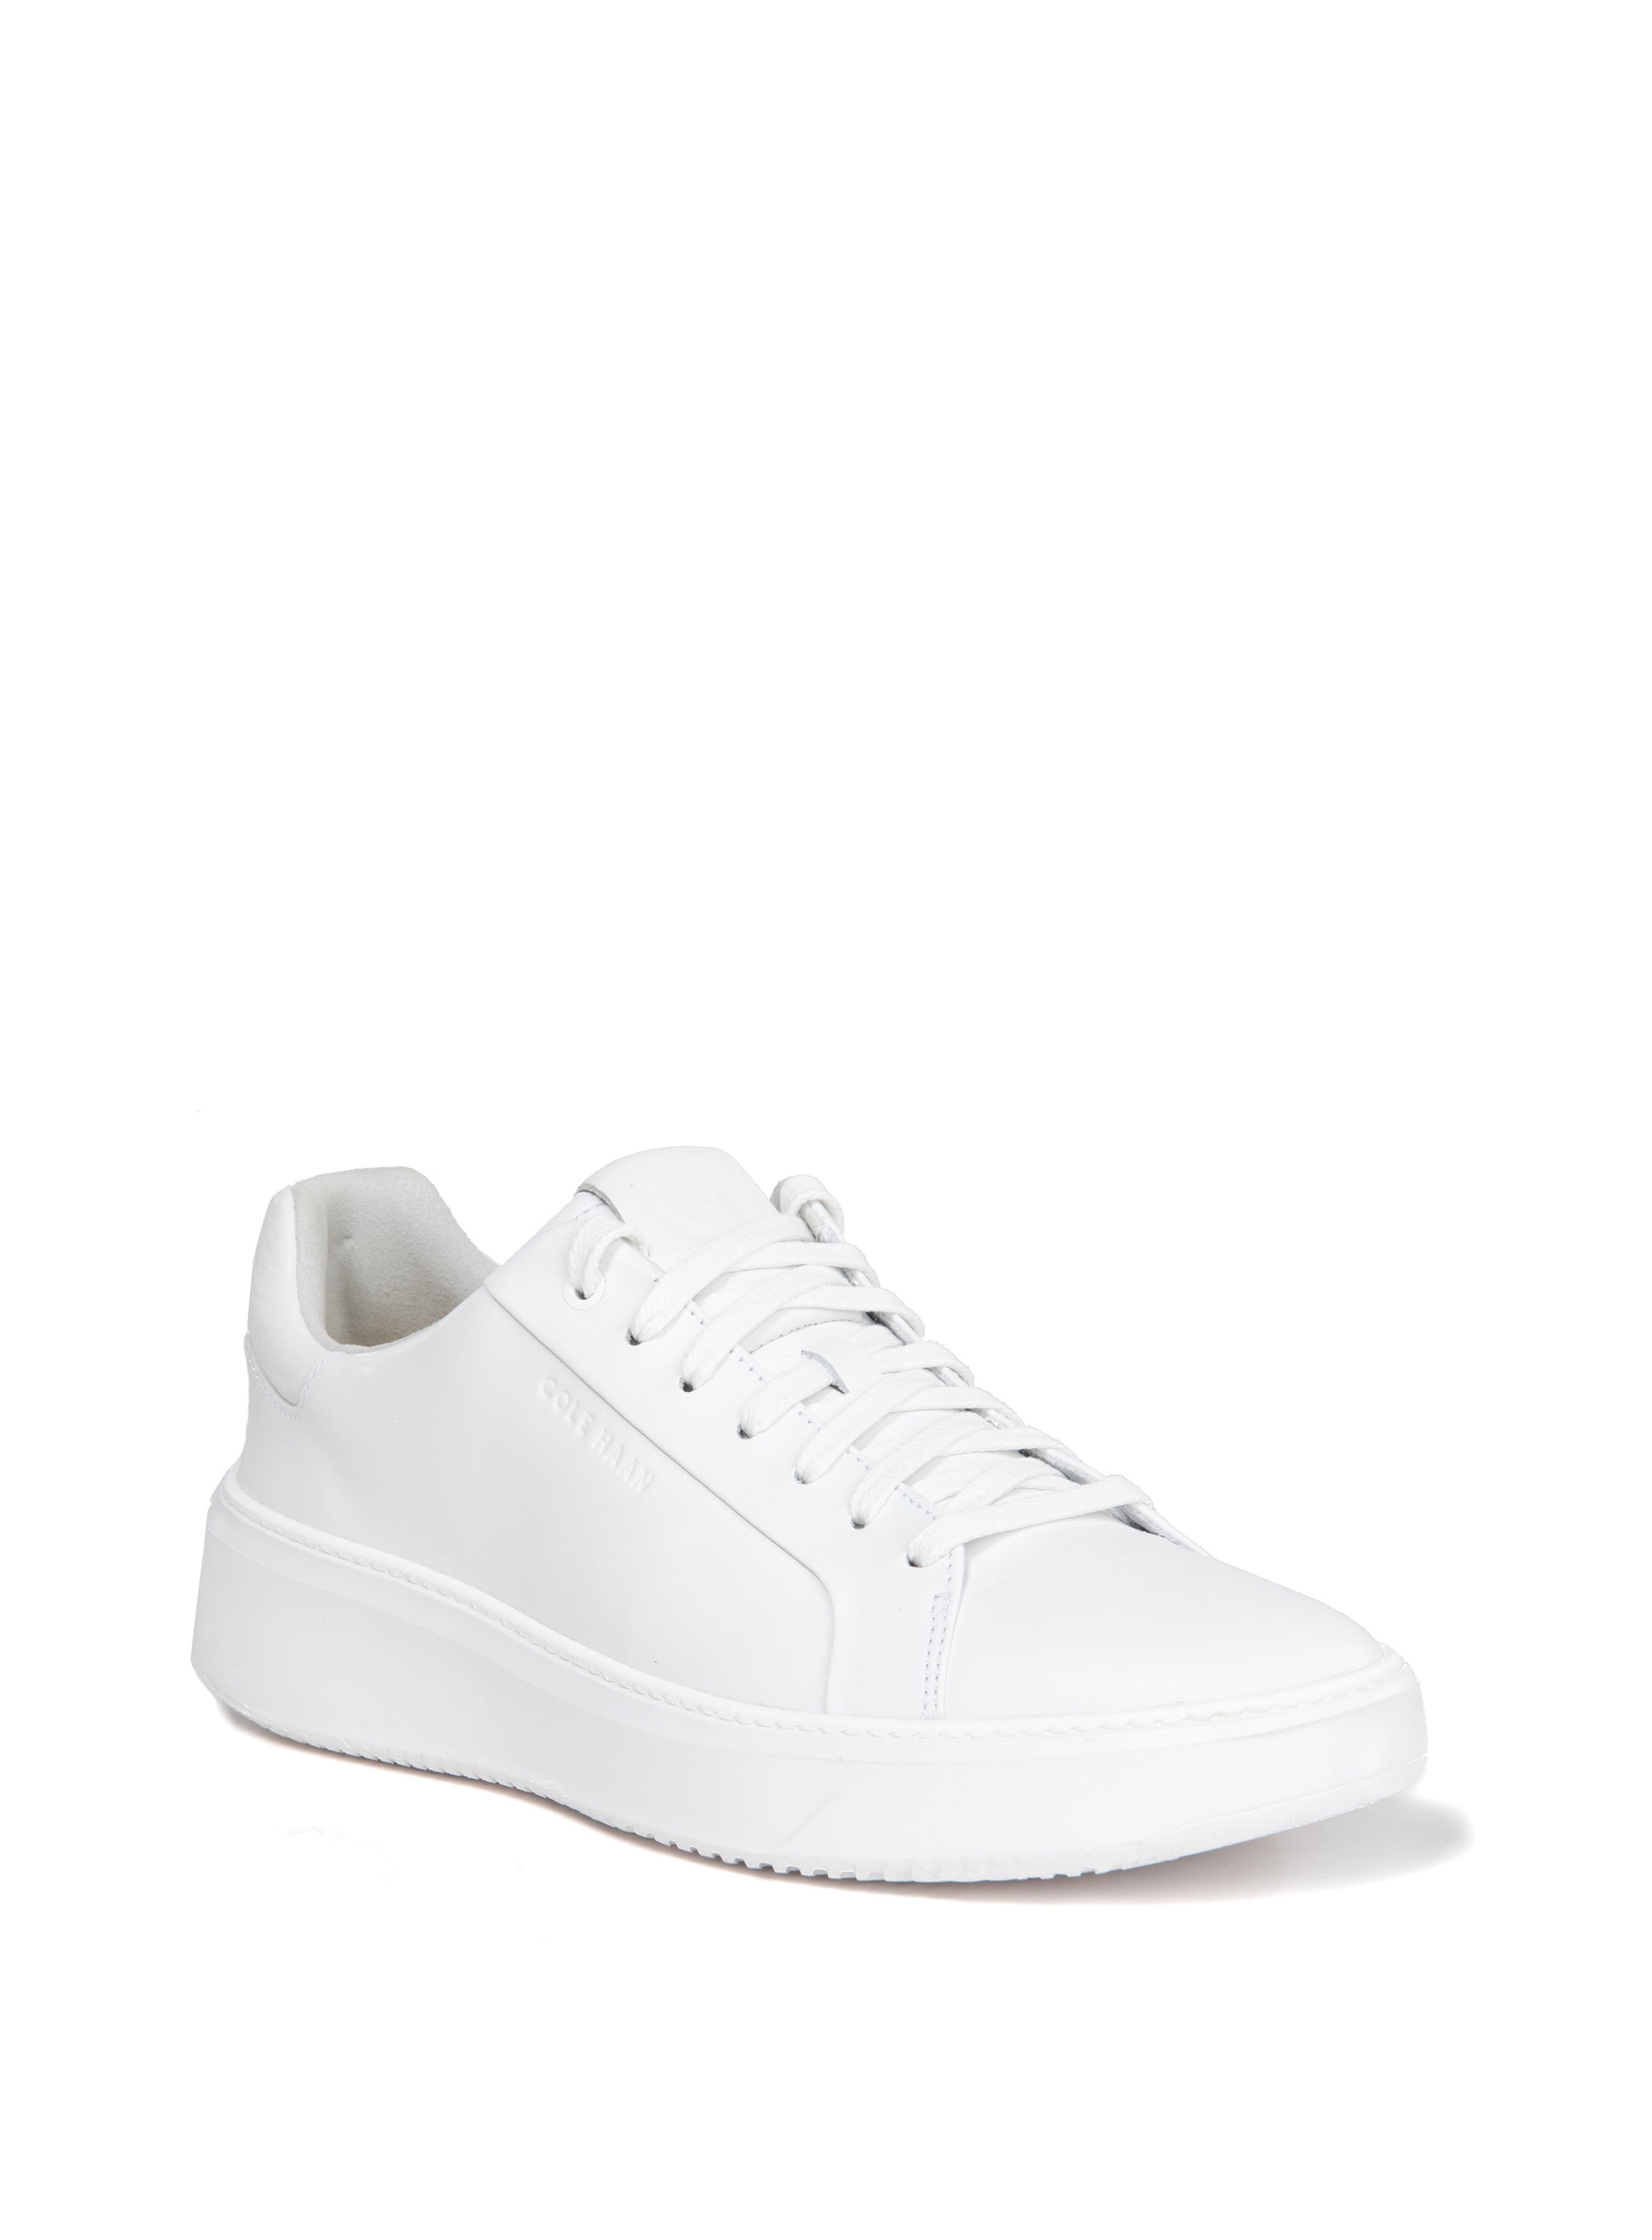 White 'Grandpro Topspin' Shoes